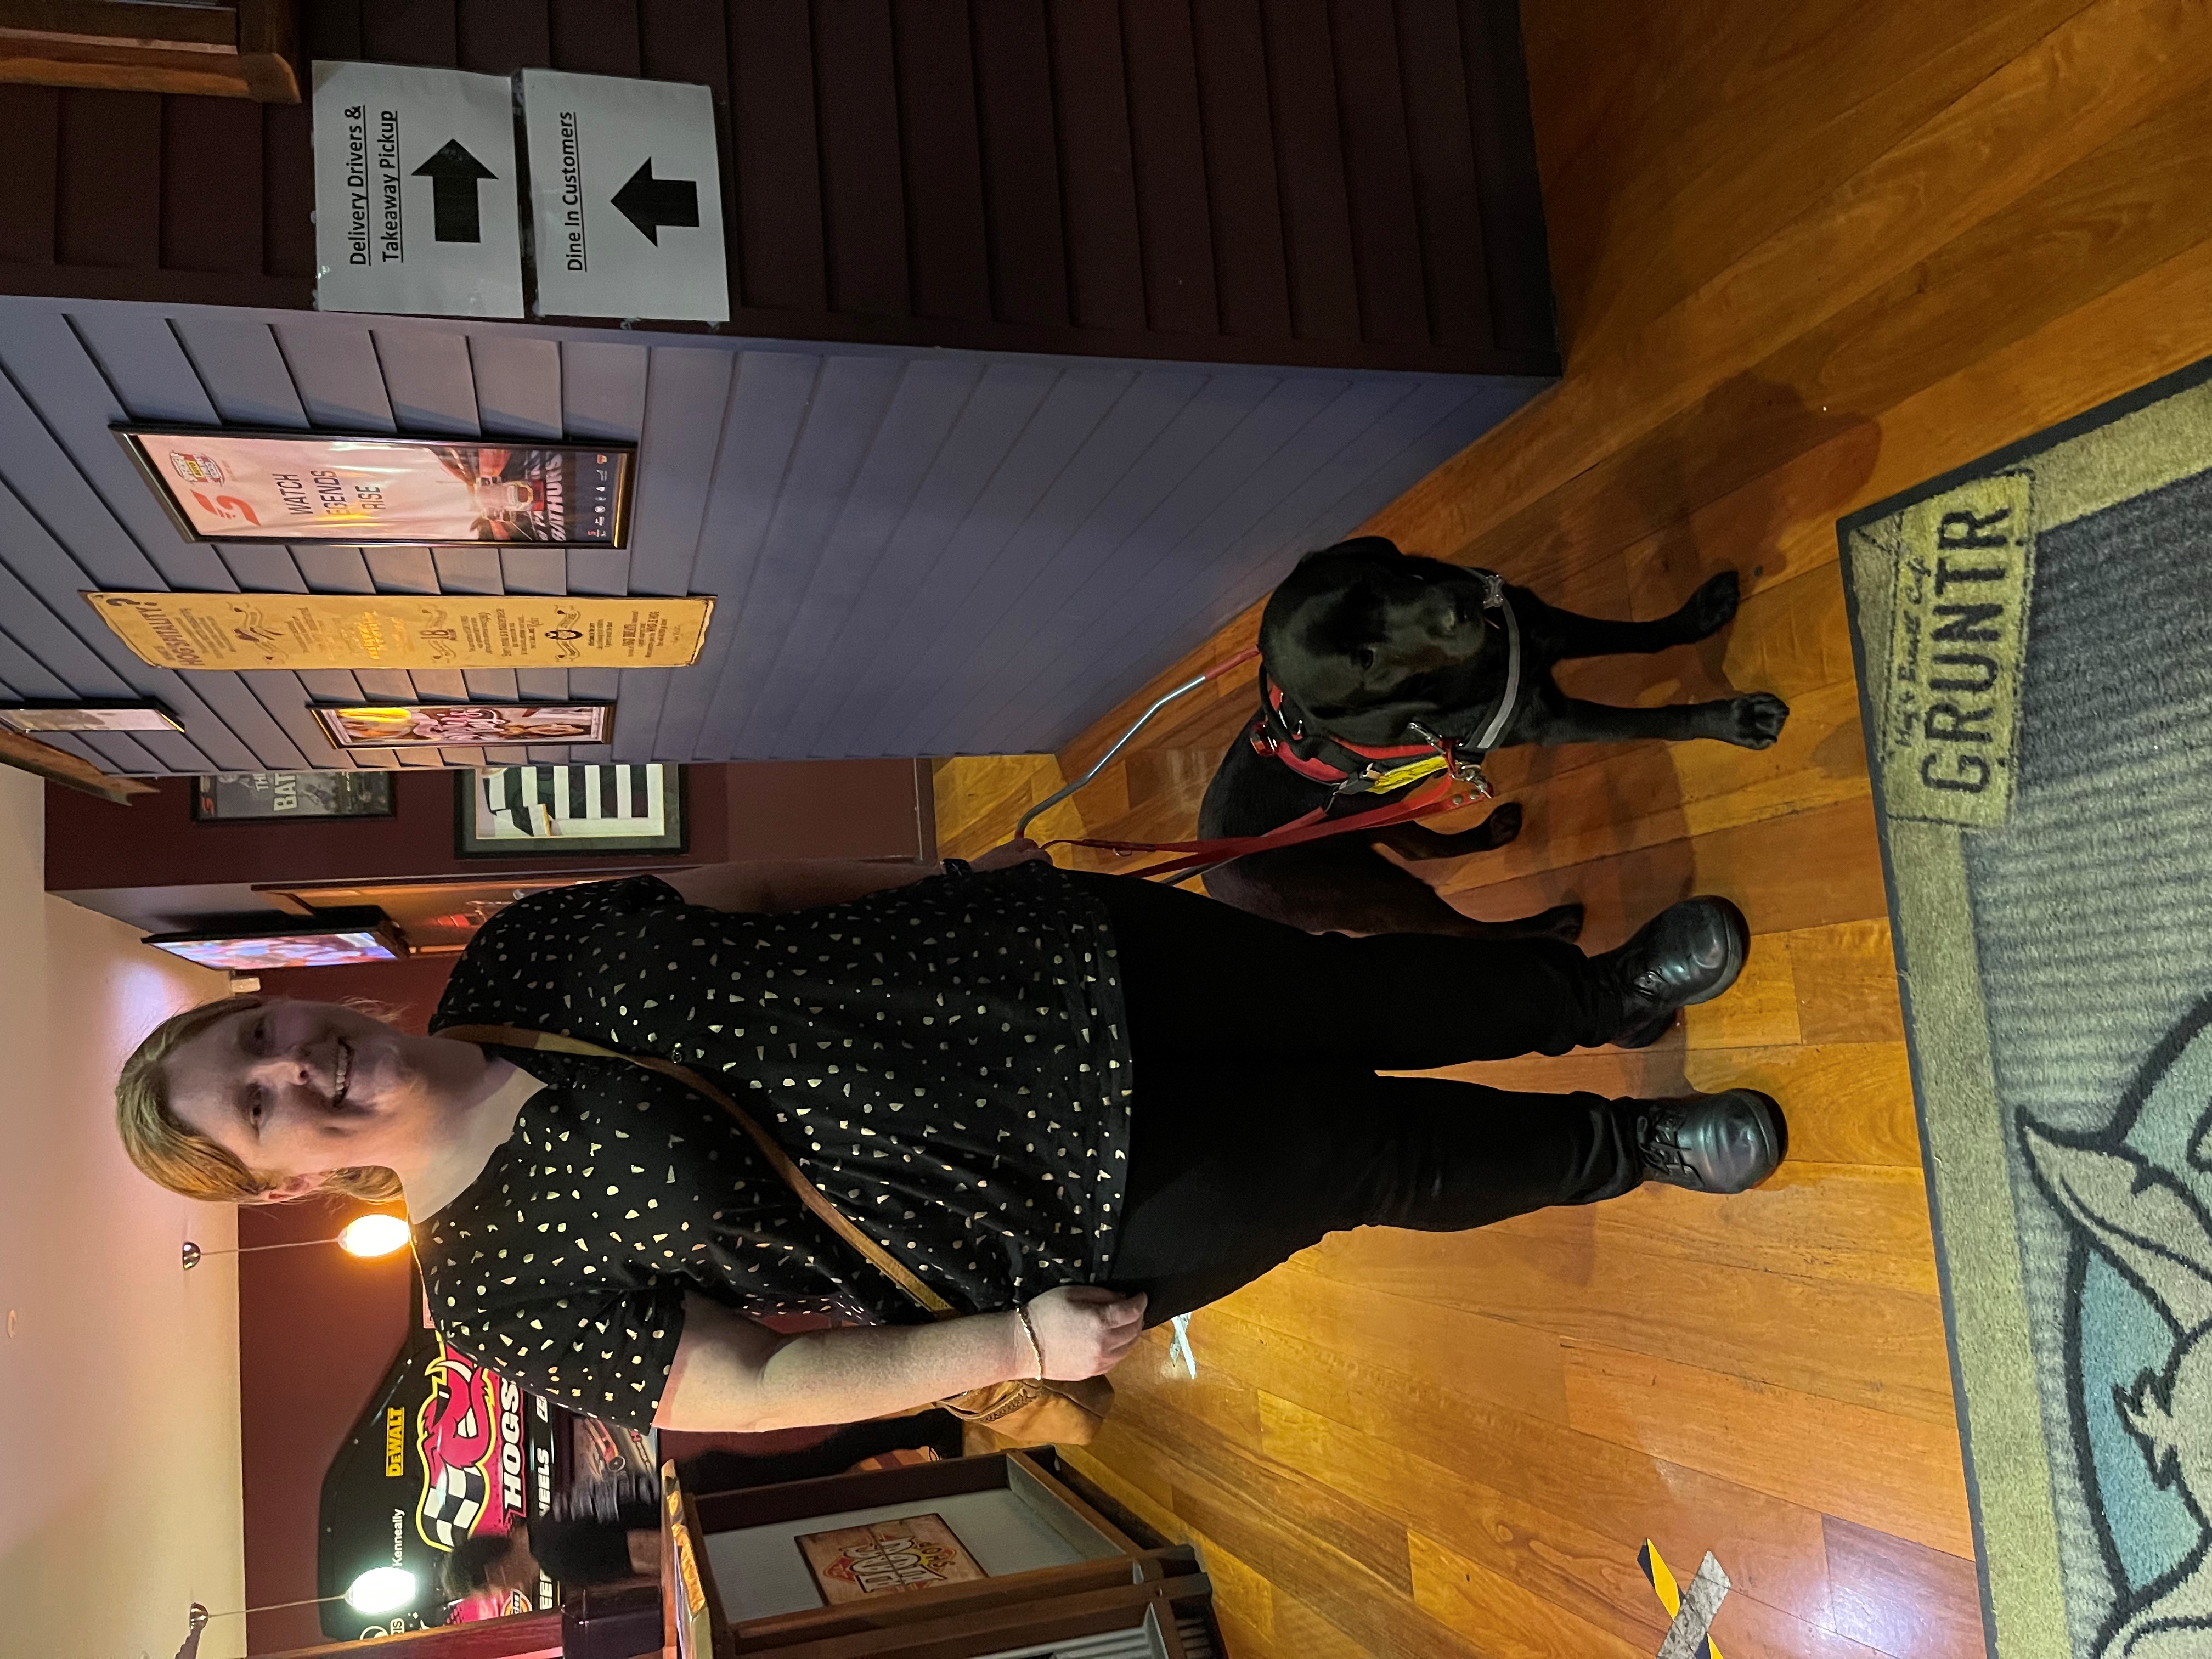 Isabella at a restaurant with Seeing Eye Dog Penny by her side.